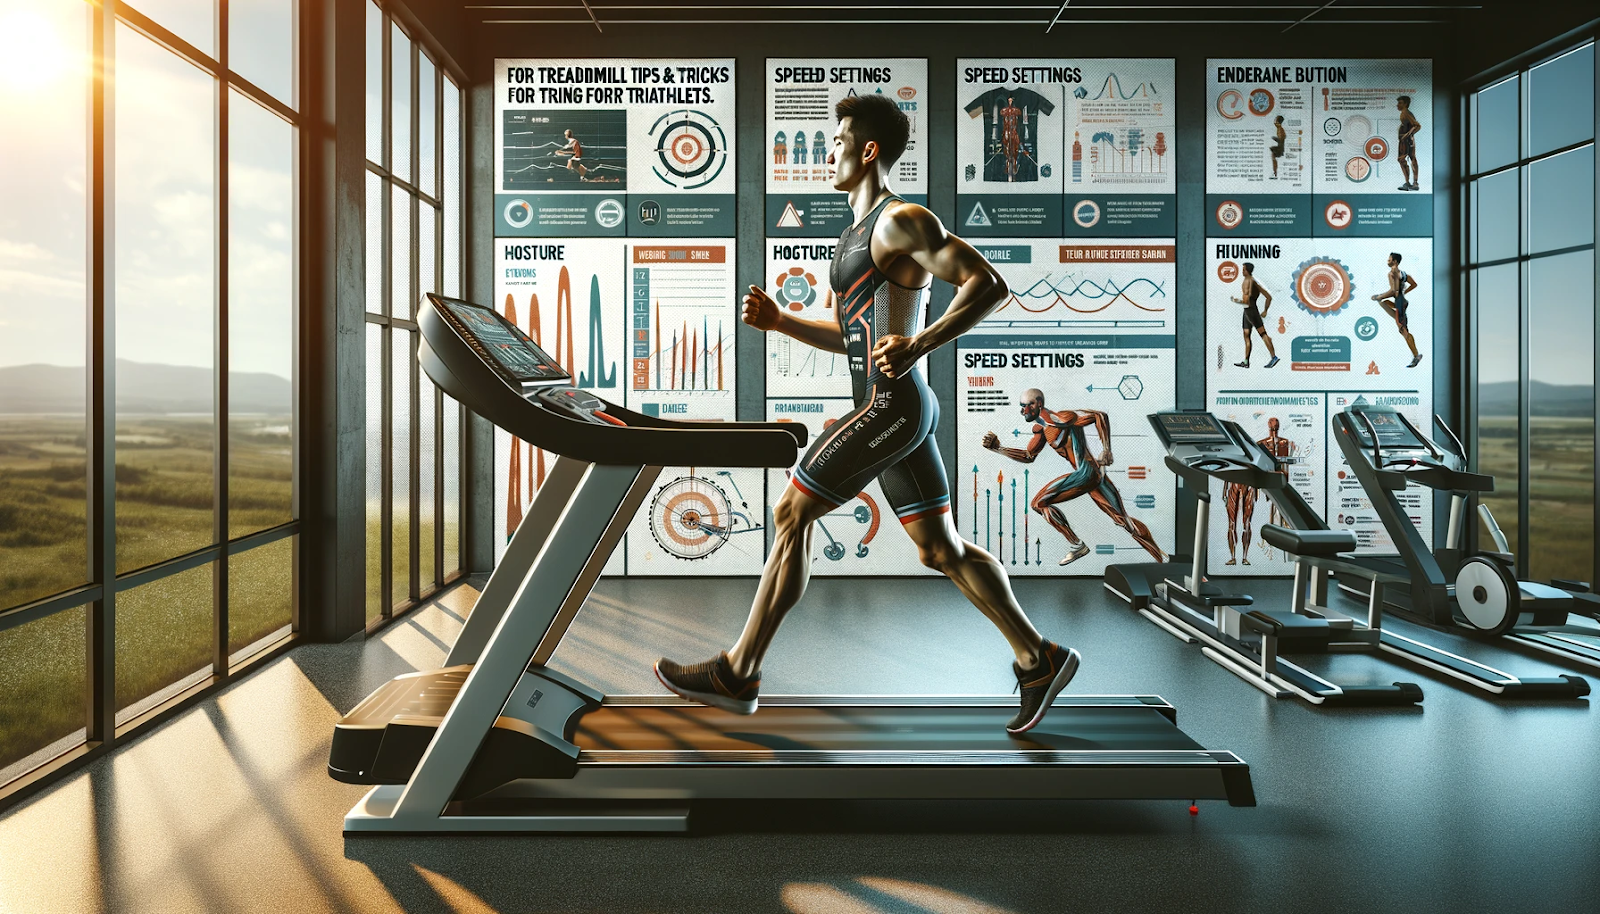 gym is well-equipped and features large windows letting in natural light. The walls are decorated with educational posters about effective treadmill use for triathletes. The overall atmosphere is one of focus, professionalism, and a dedication to athletic training in a health-conscious environment.